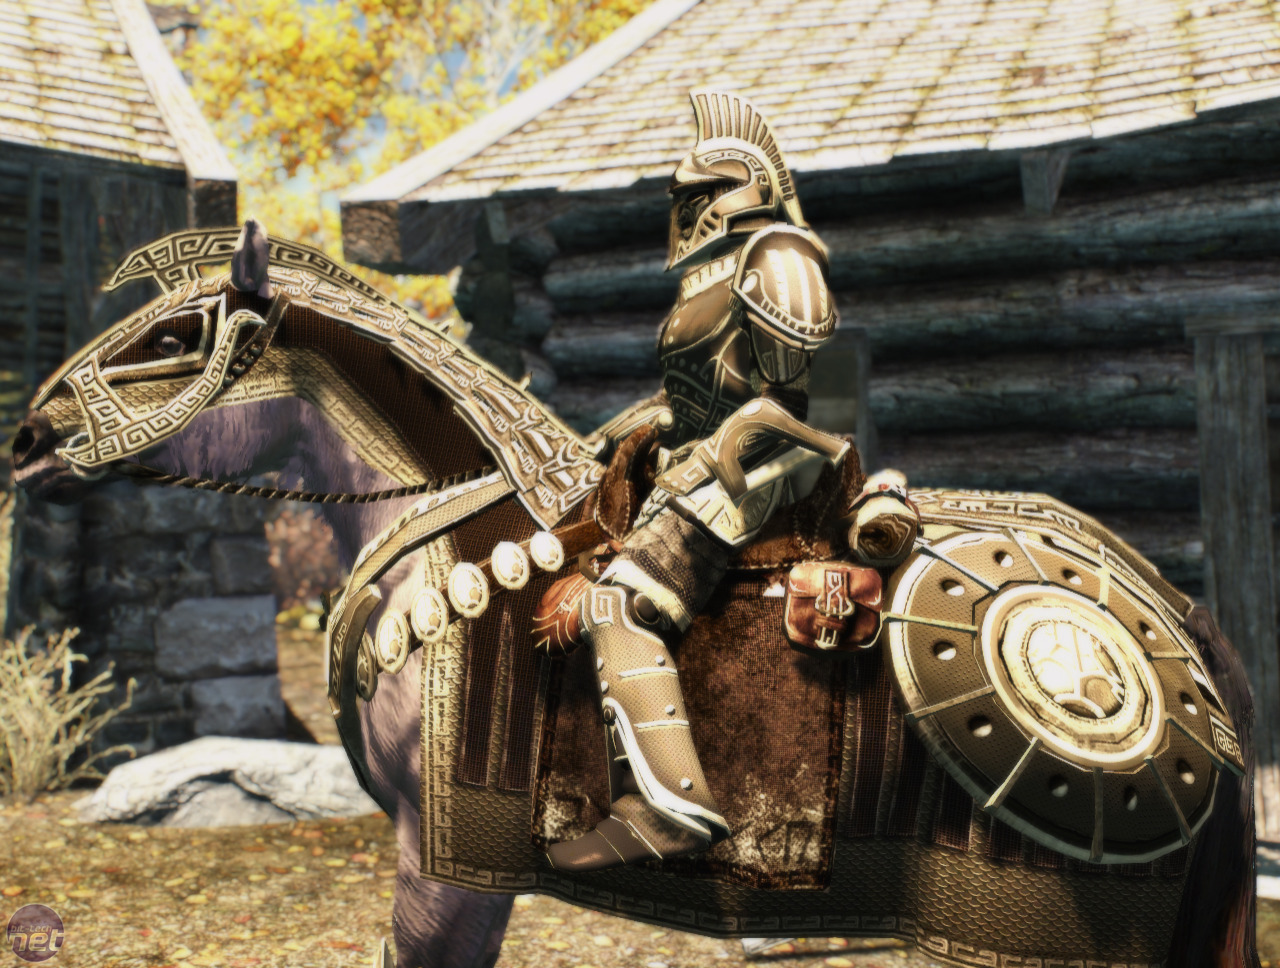 Red Fox's Blog!: Lets talk about horse armor...